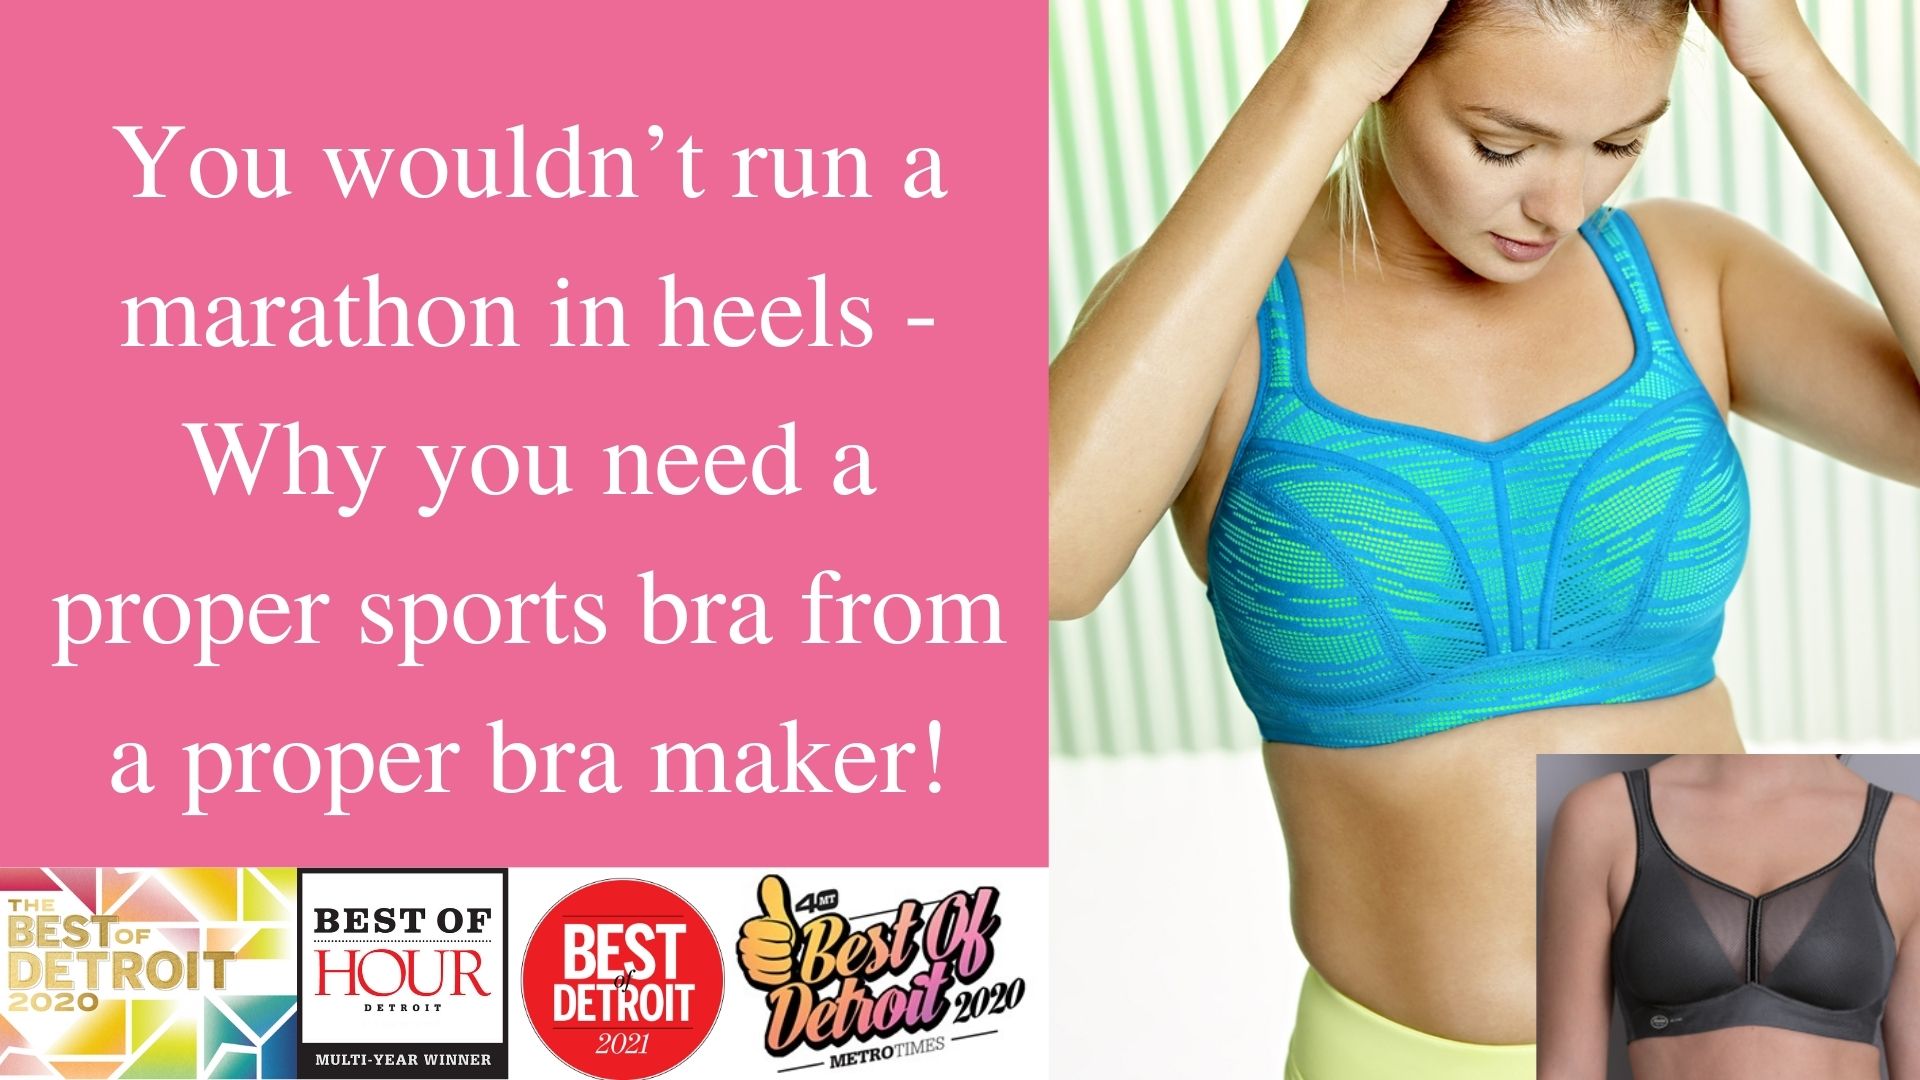 You wouldn't run a marathon in heels - Why you need a proper